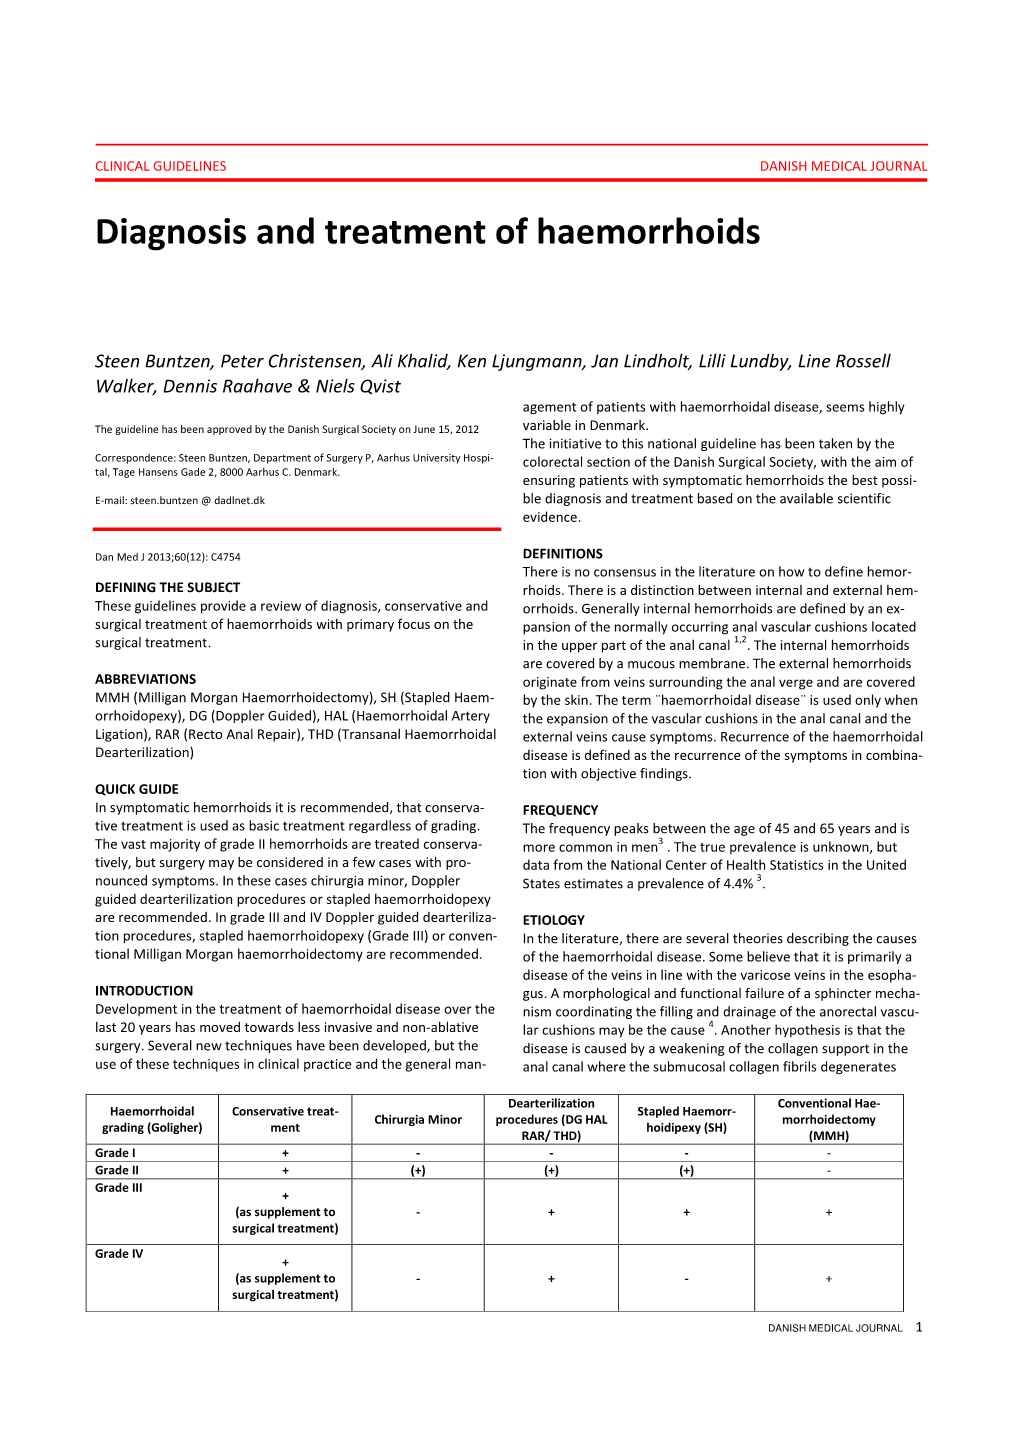 Diagnosis and Treatment of Haemorrhoids